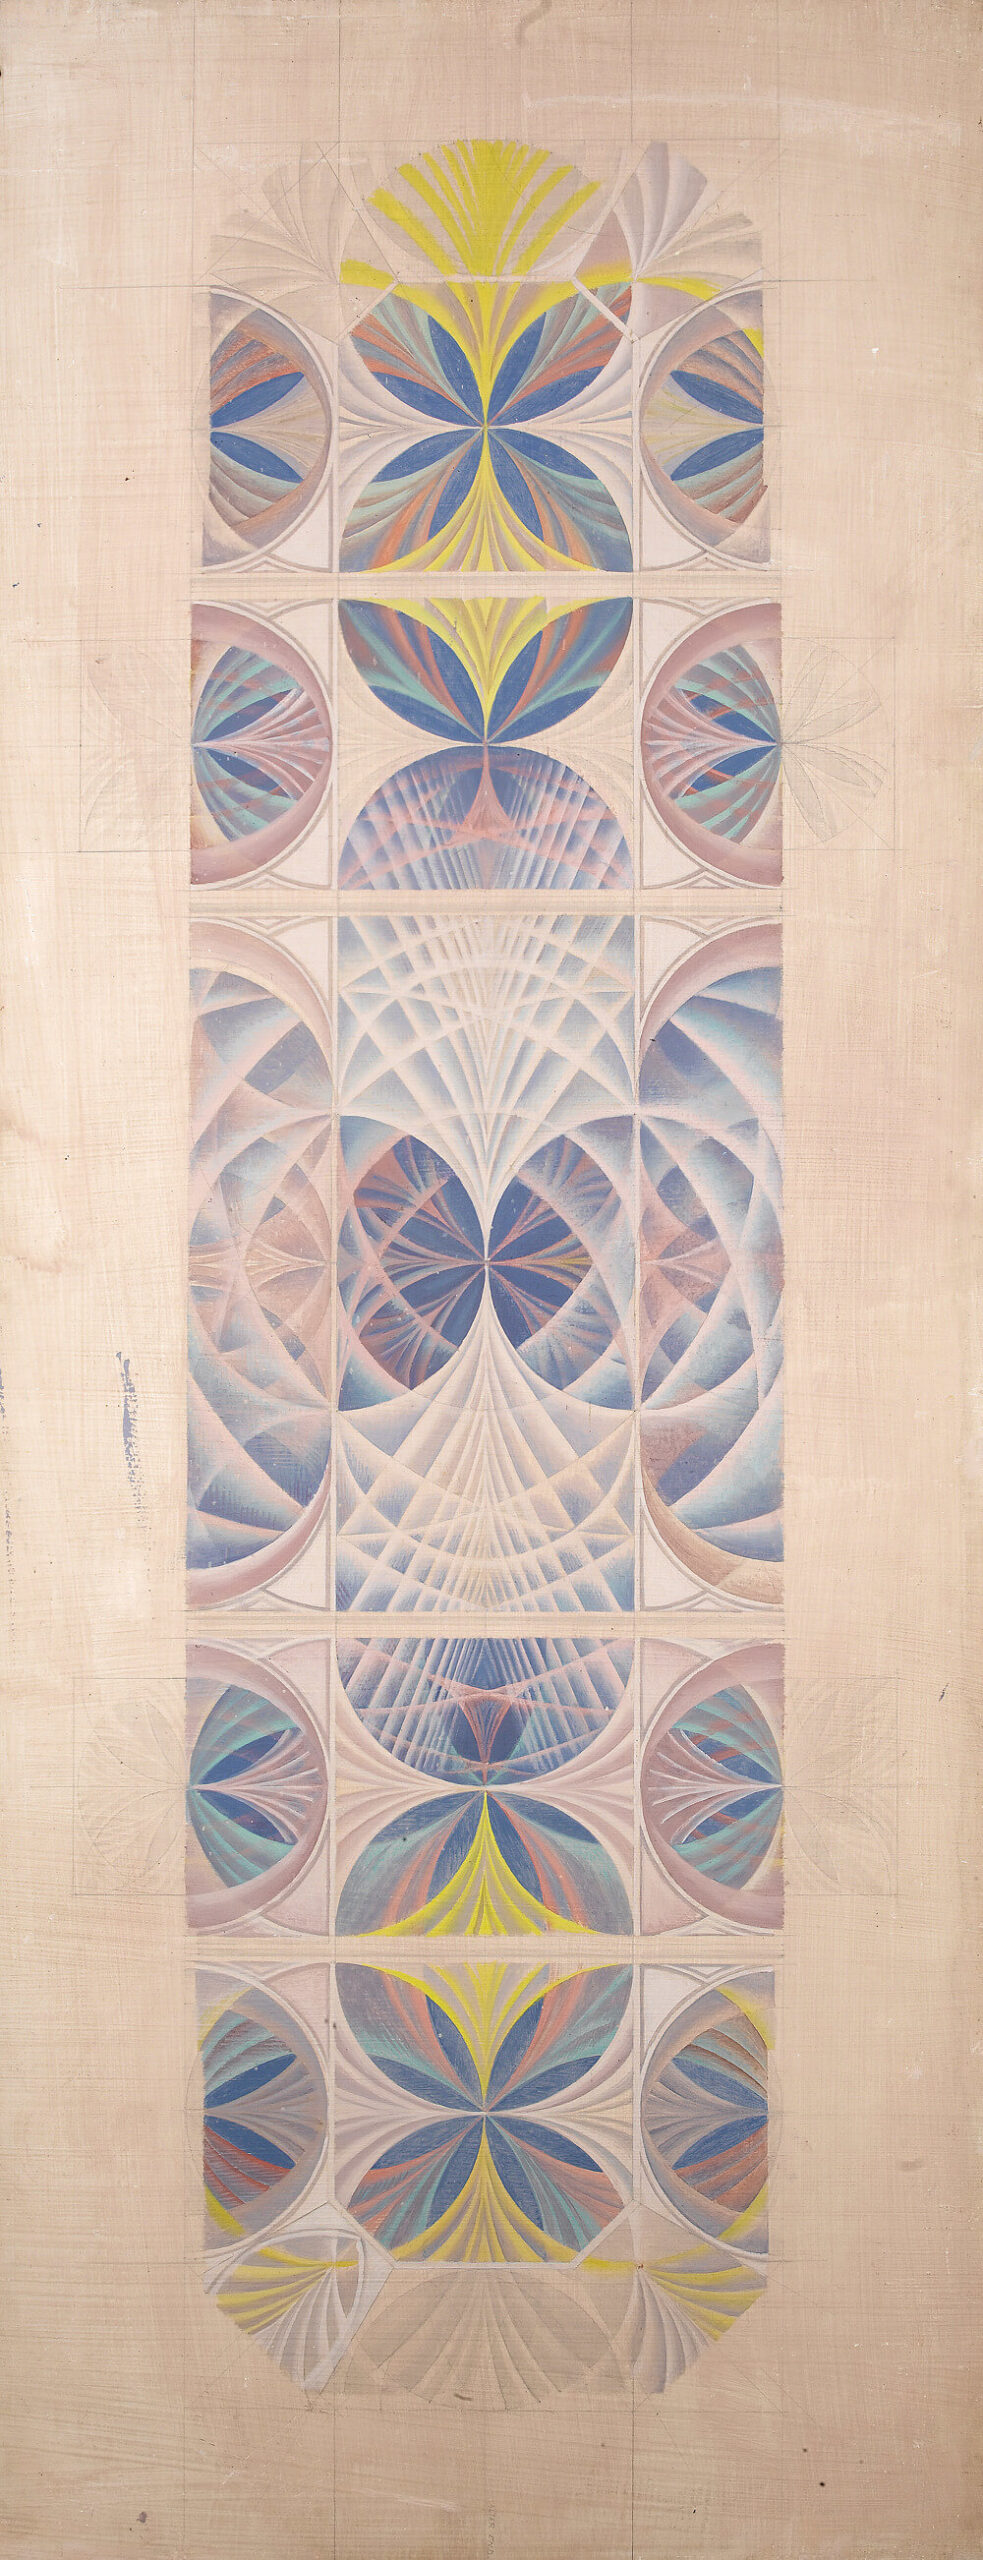 Sir Thomas Monnington - Design for the ceiling of the Mary Harris Memorial Chapel